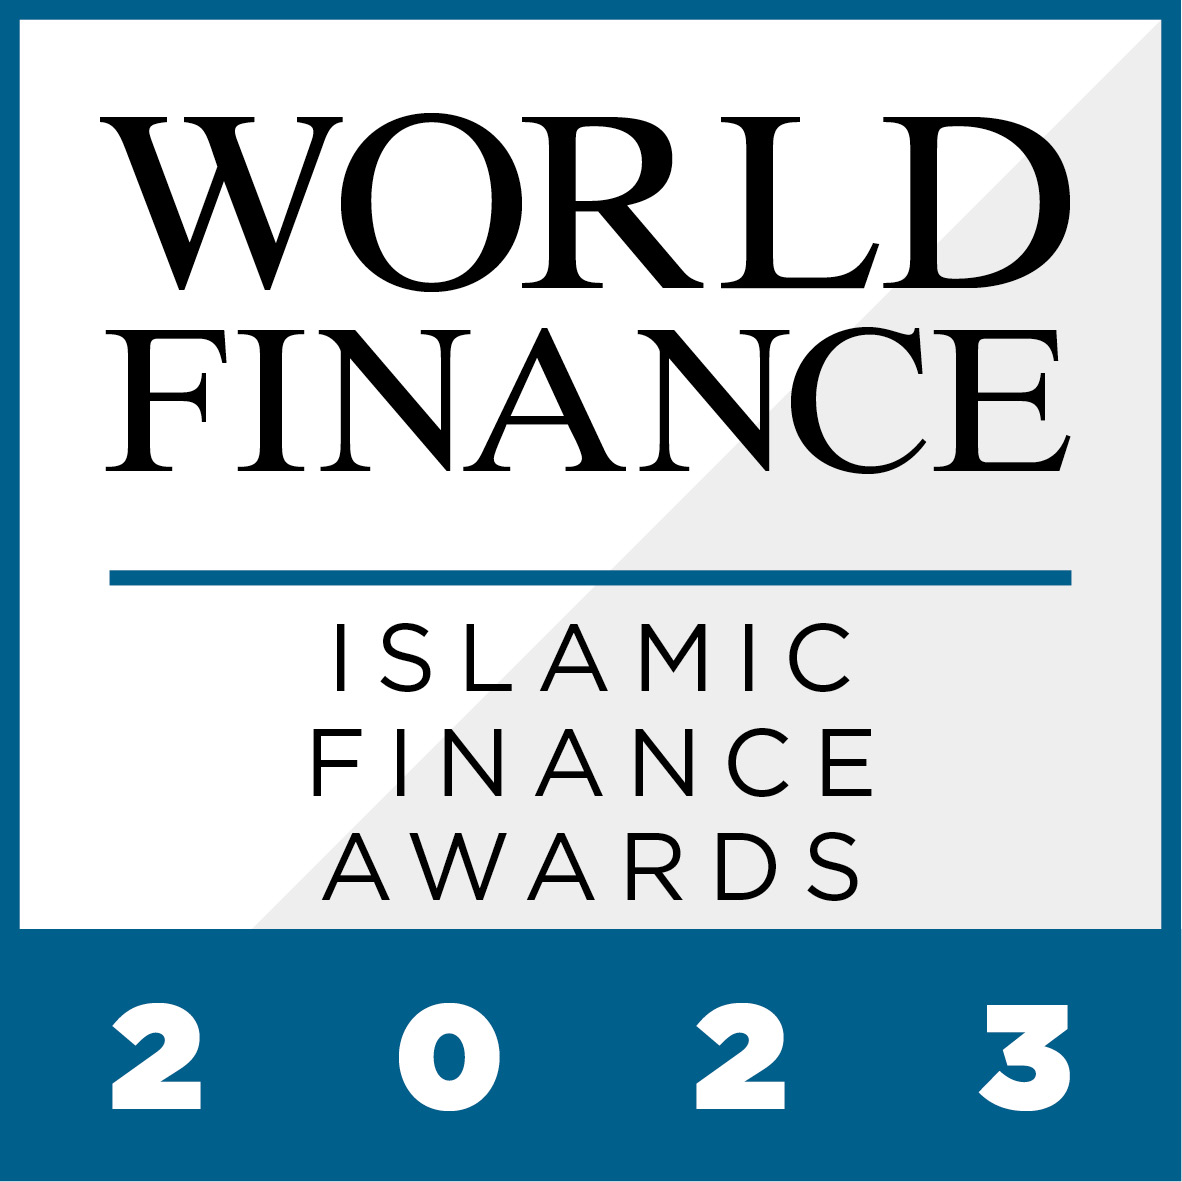 A list of the companies awarded in the World Finance Islamic Finance awards 2023 can be seen below.